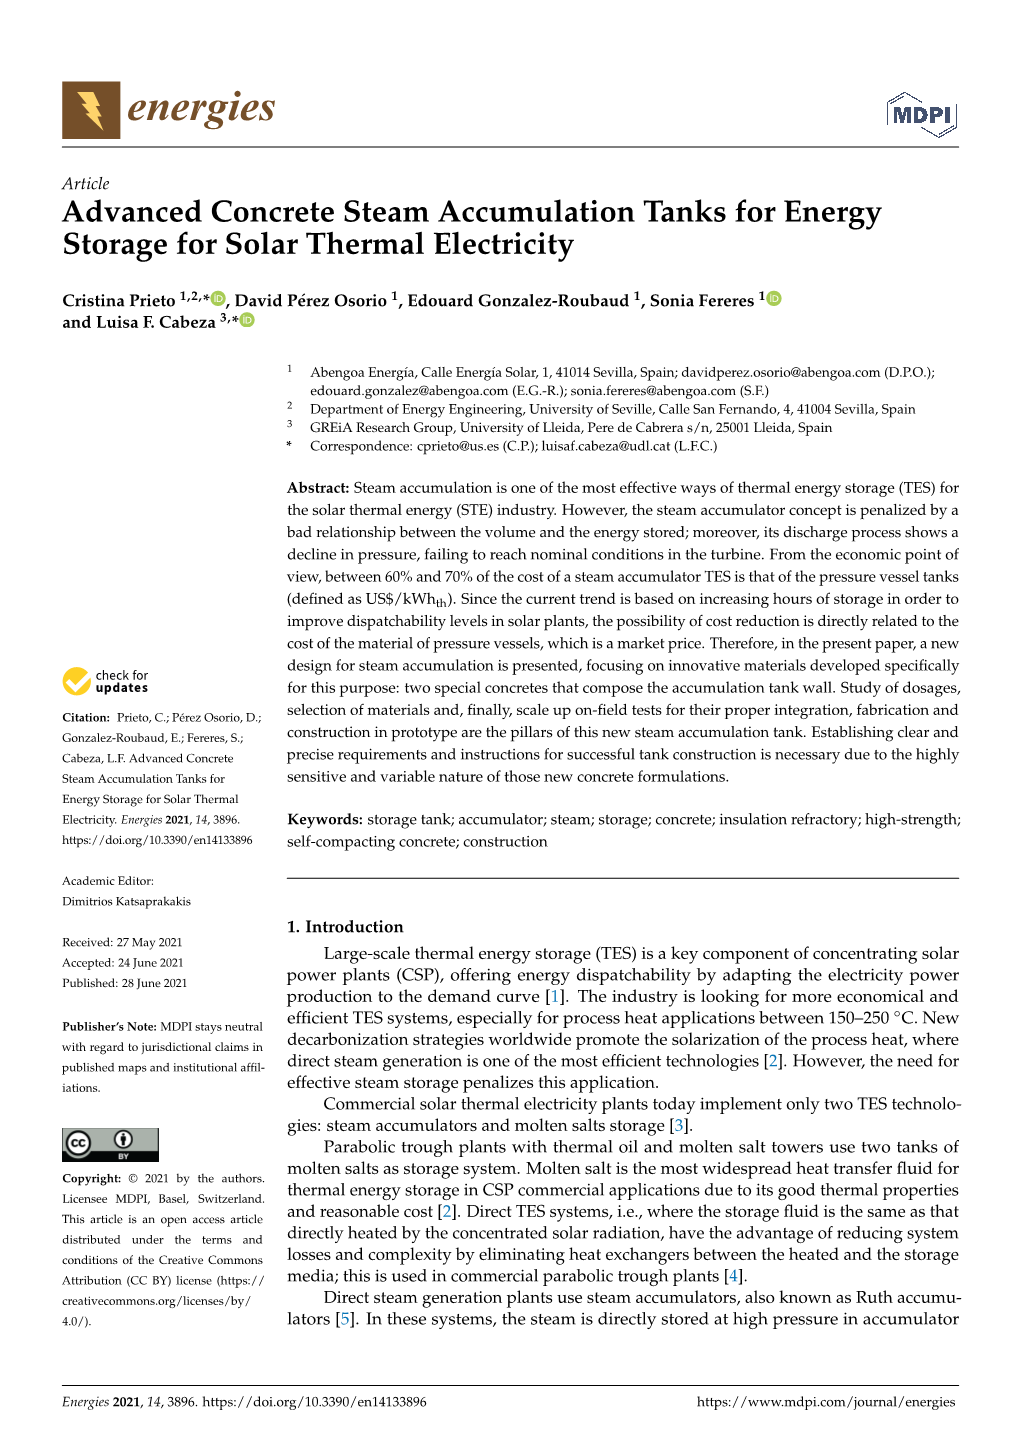 Advanced Concrete Steam Accumulation Tanks for Energy Storage for Solar Thermal Electricity